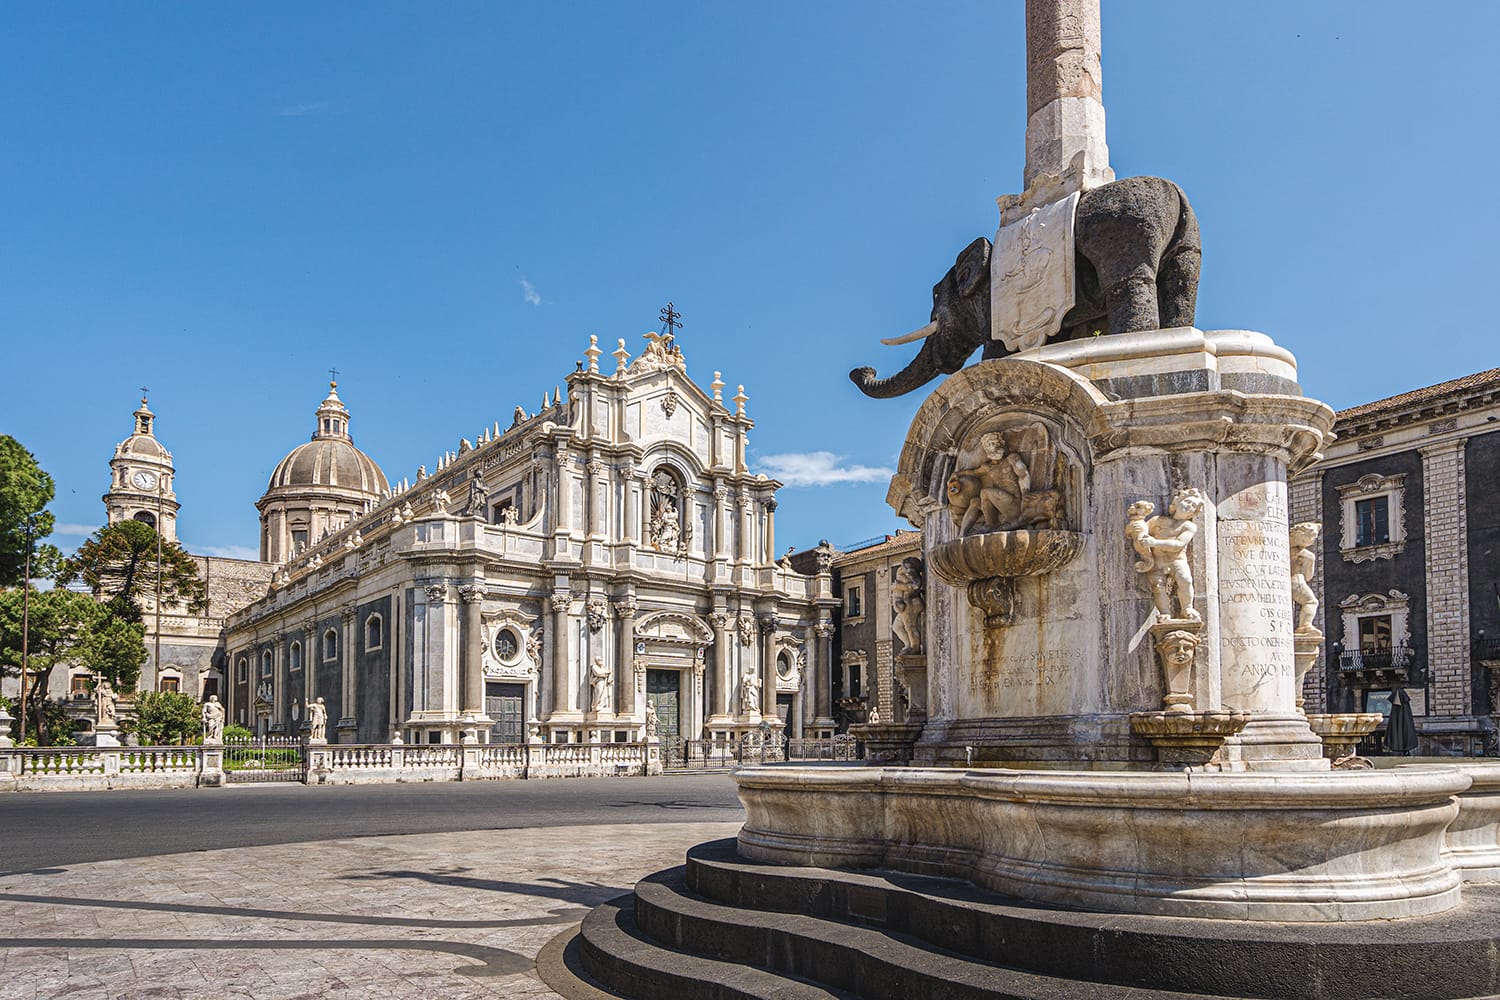 Dome the fountain elephant (1737) and the Cathedral of Saint Agatha in Catania, Sicily, Italy